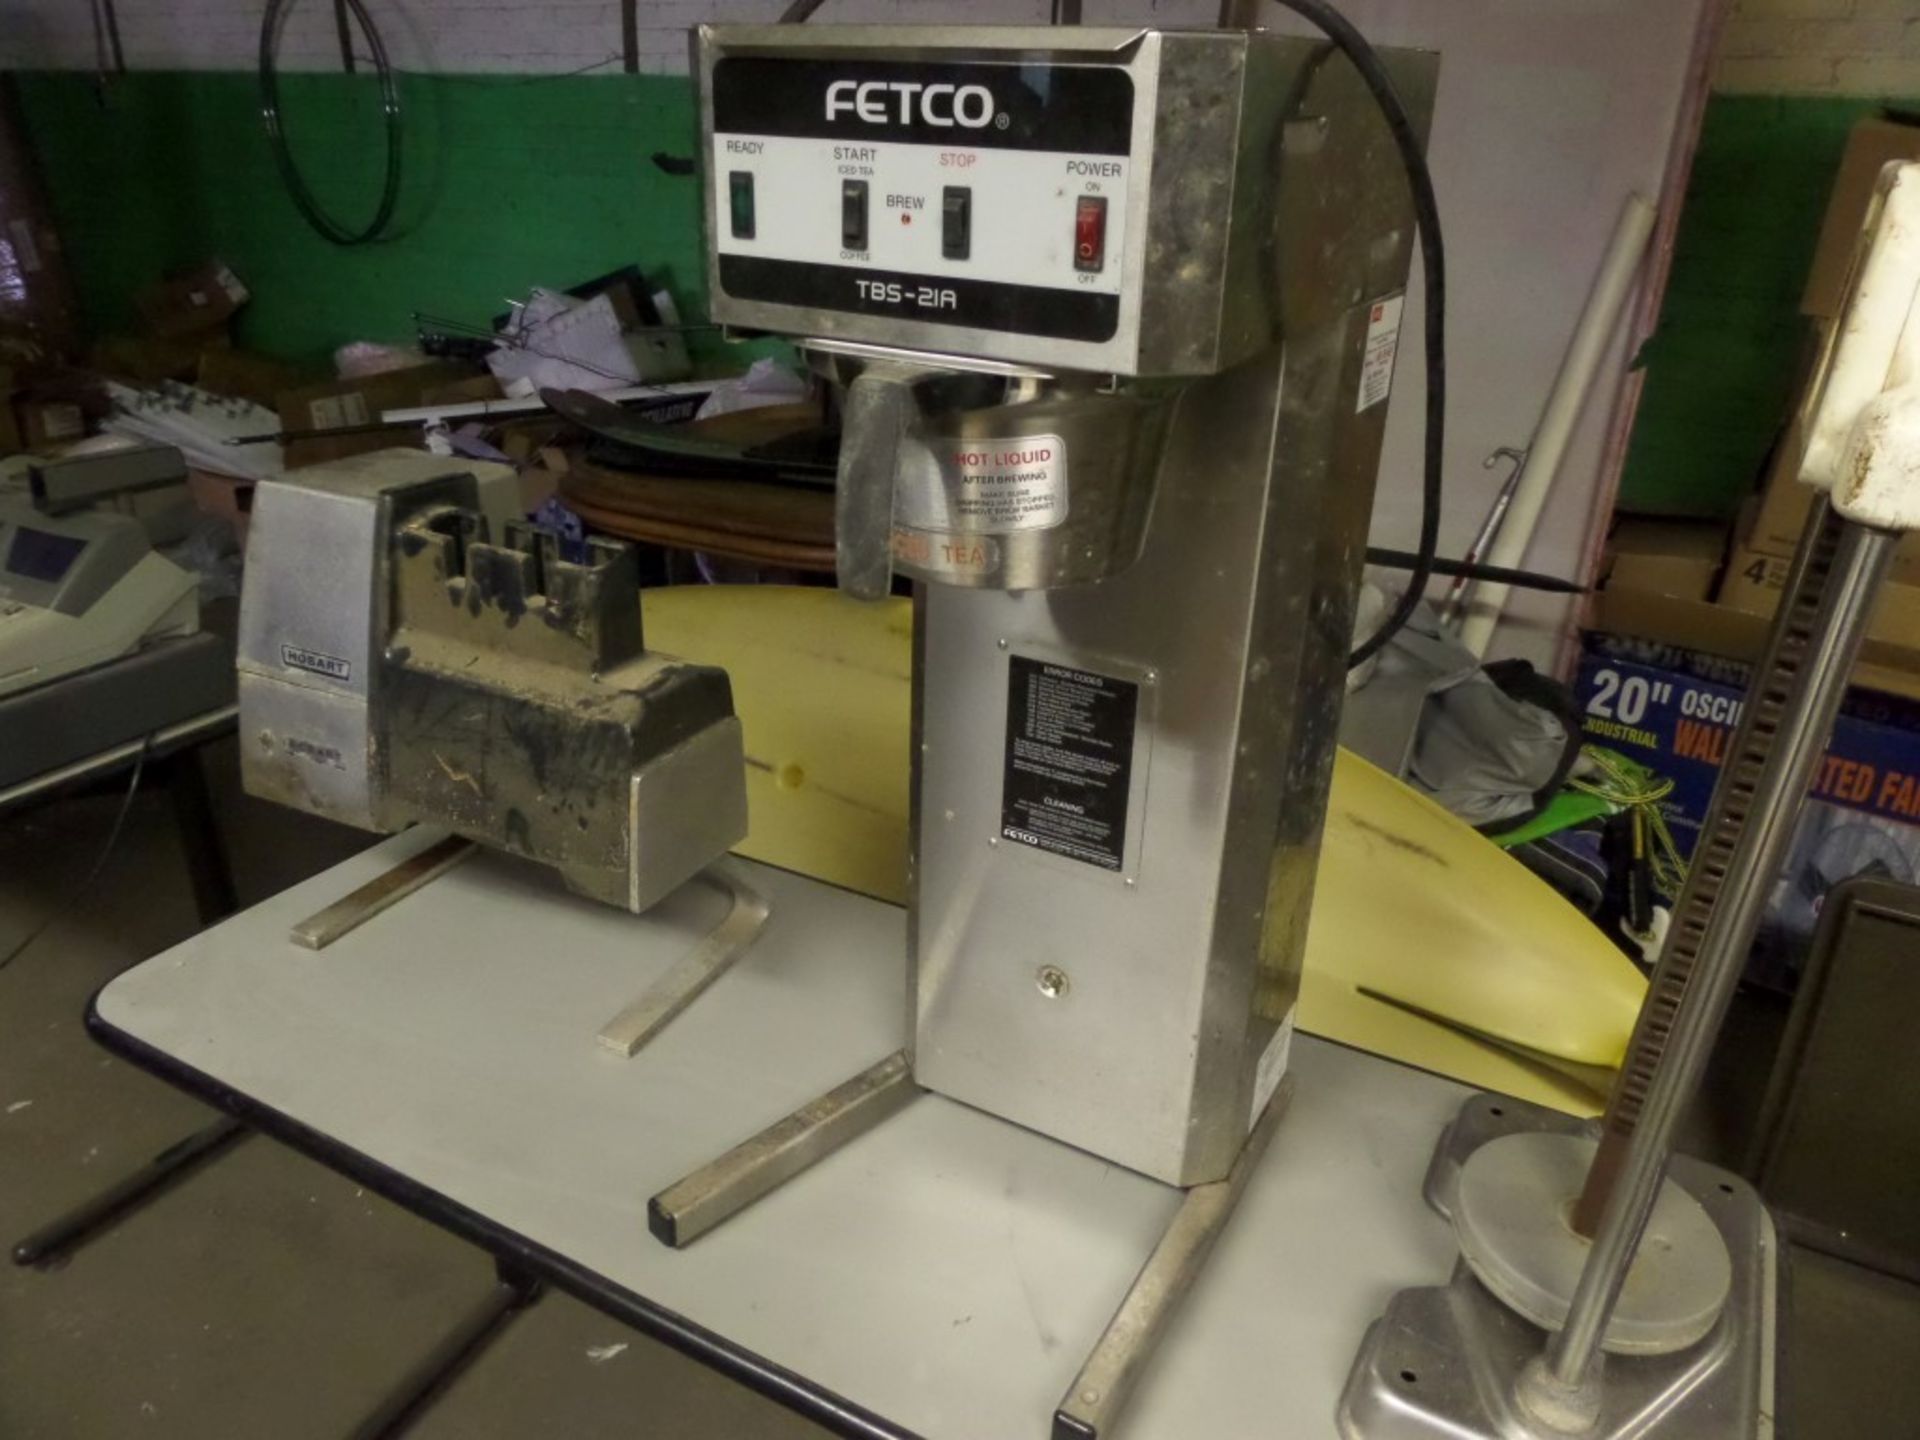 Fetco Large Commercial Coffee/Tea Brewer Computer Controled